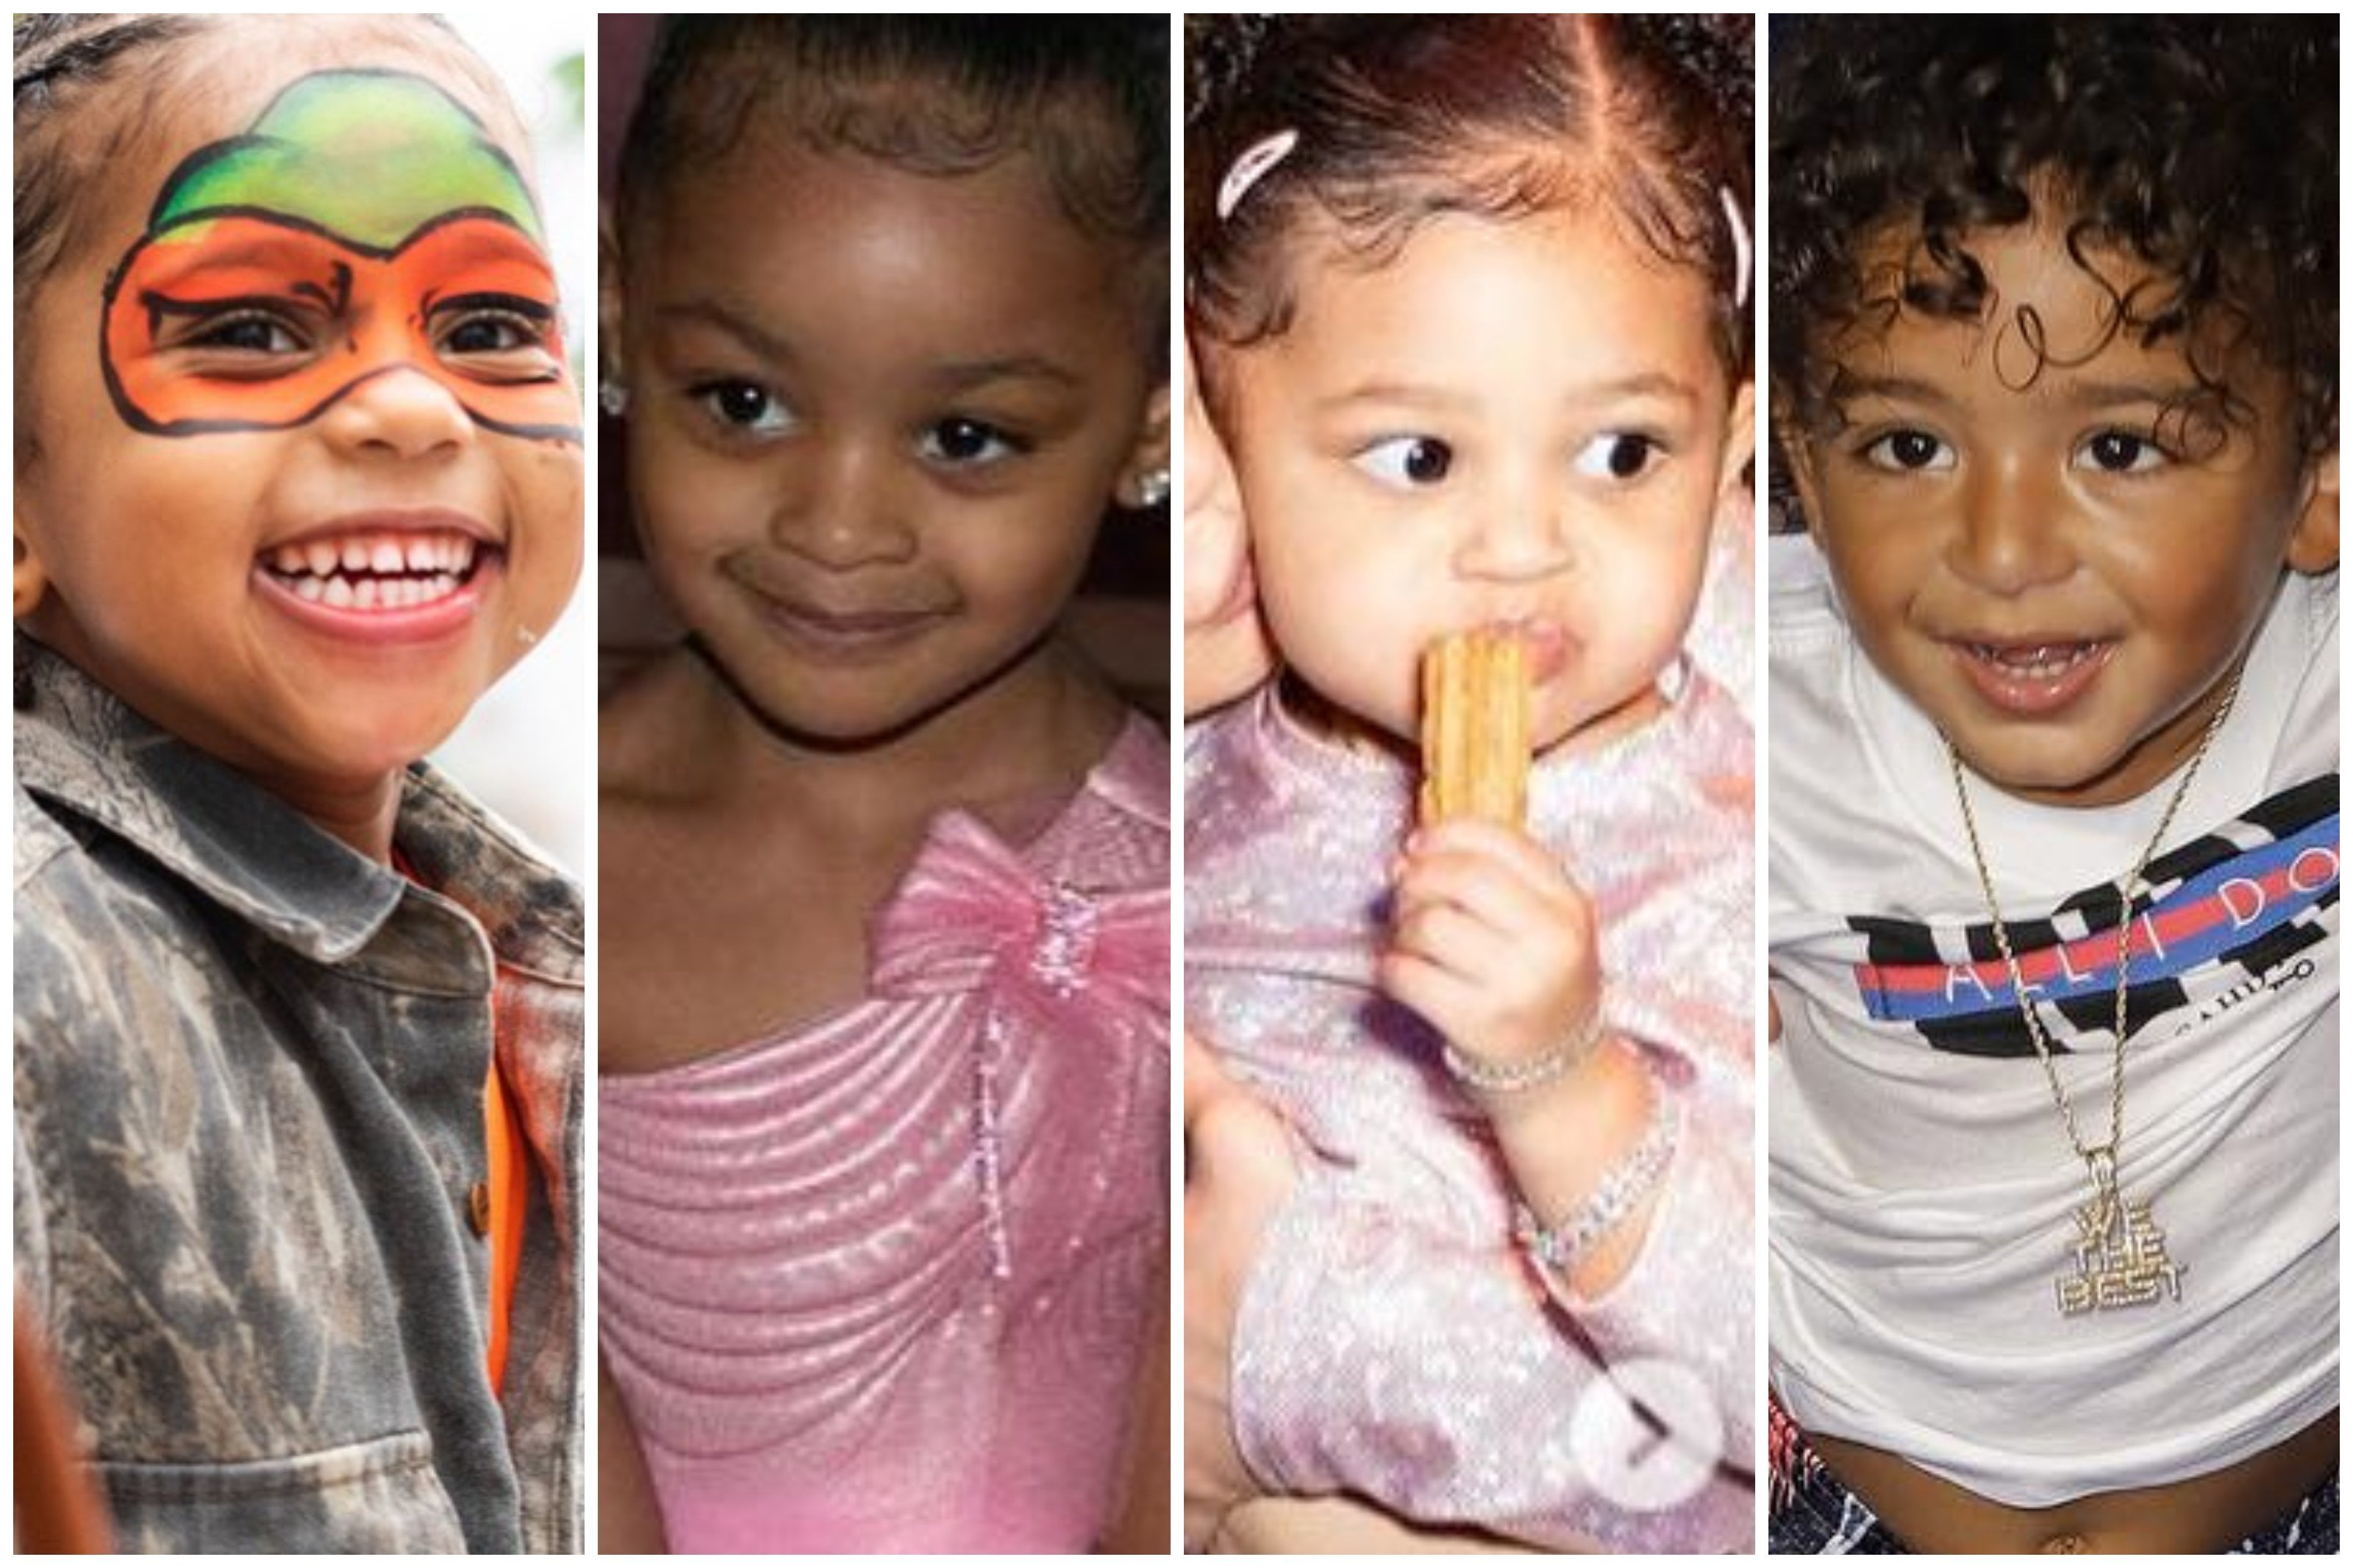 Kim Kardashian’s son Saint West, Cardi B’s daughter Kulture, Kylie Jenner’s daughter Stormi and DJ Khaled’s son Asahd have all had some of the biggest birthday bashes ever. Photos: @kimkardashian, @cardib, @kyliejenner, @asahdkhaled/Instagram